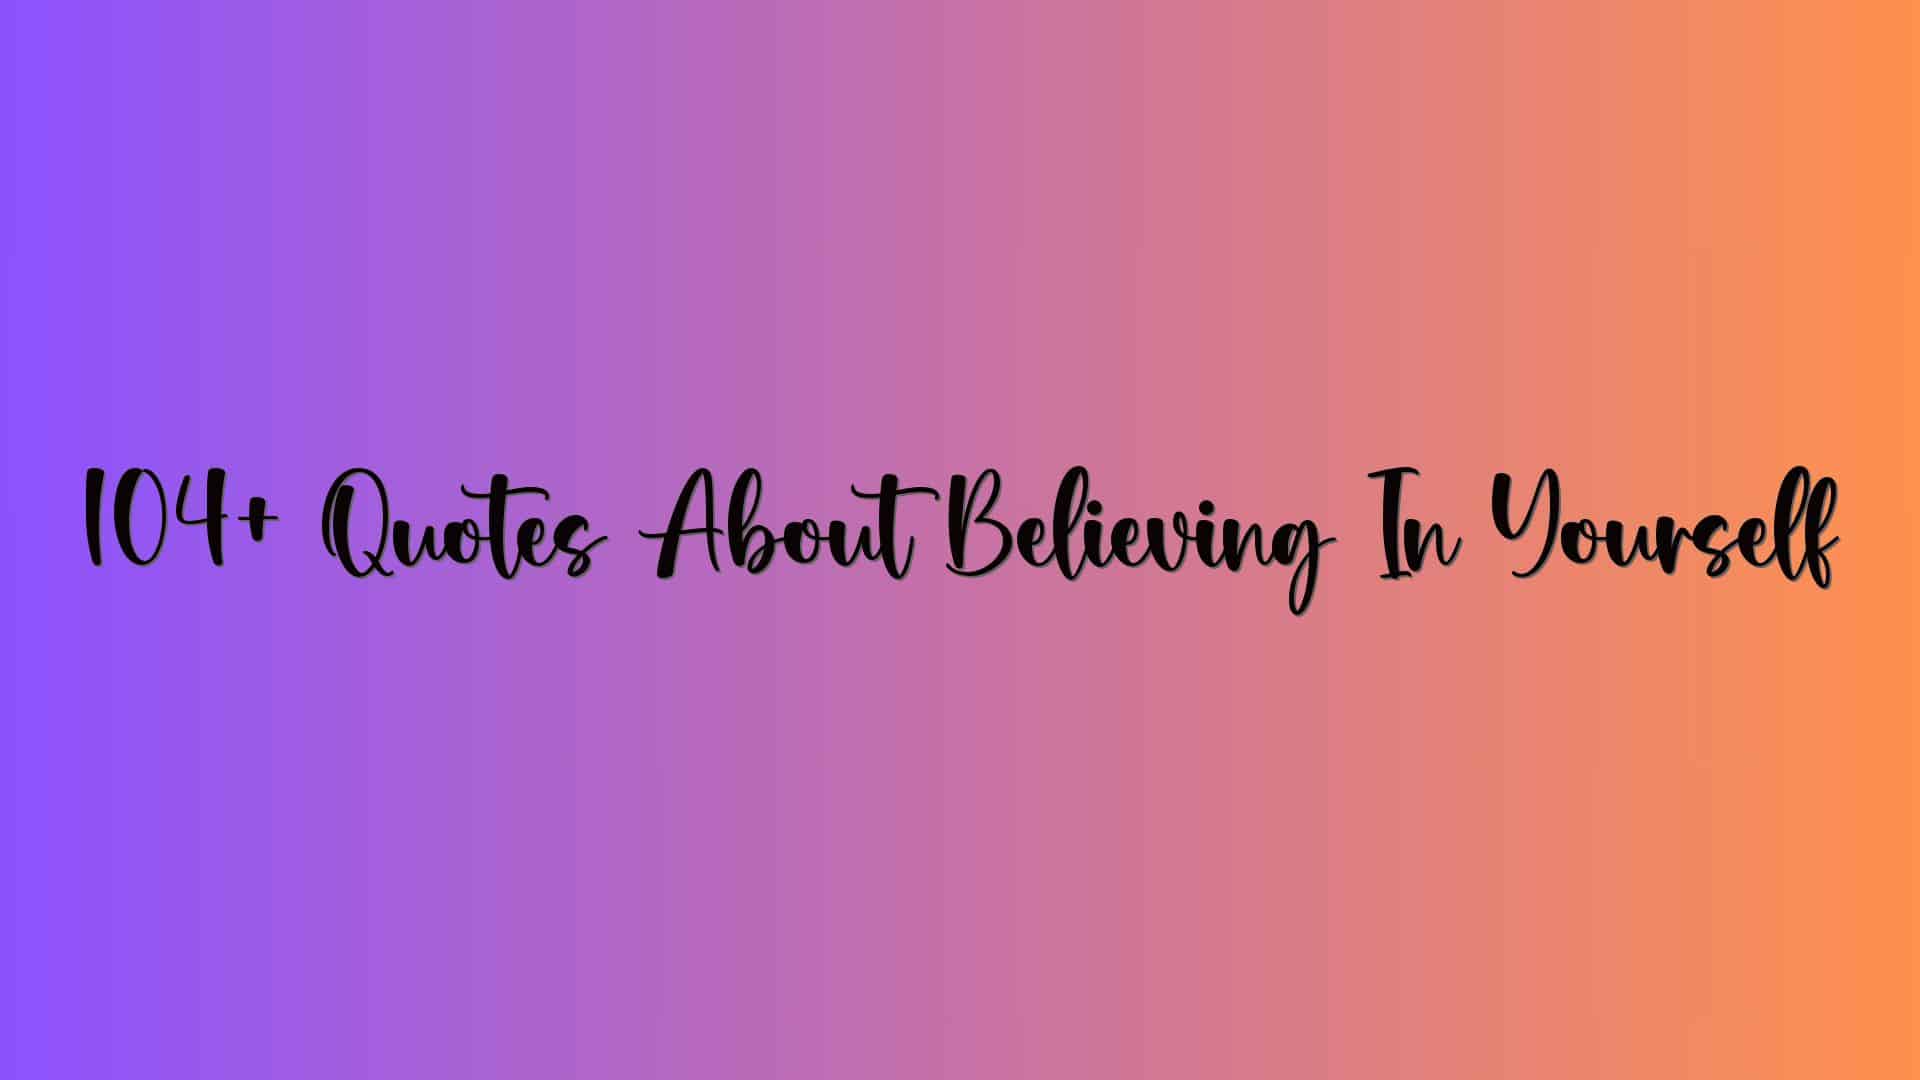 104+ Quotes About Believing In Yourself